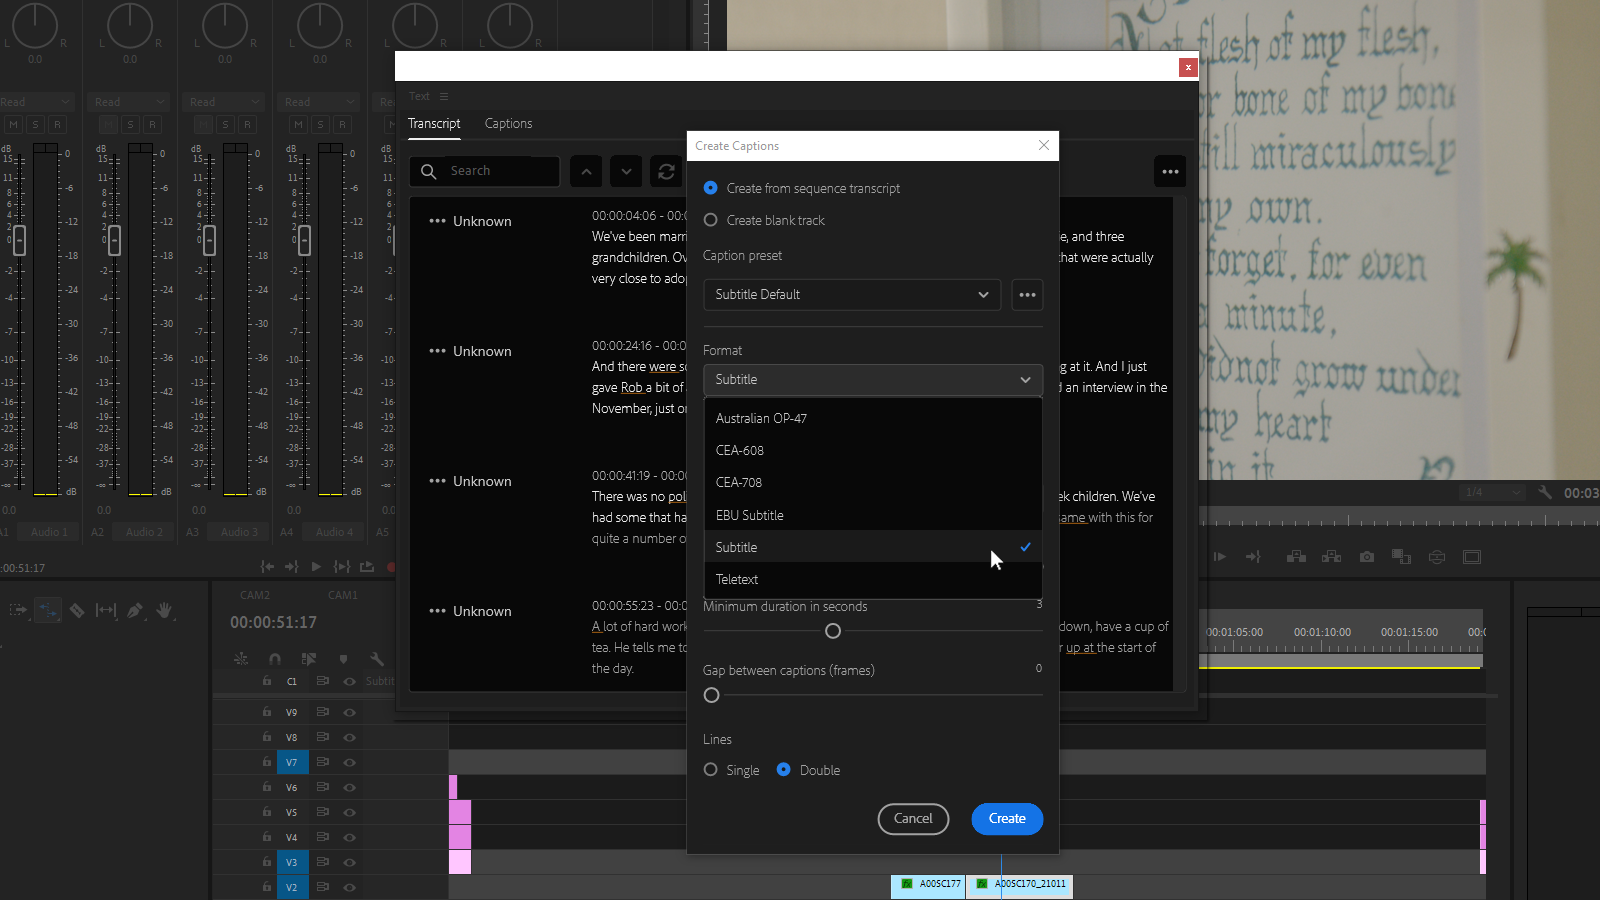 speech to text for premiere pro 2023